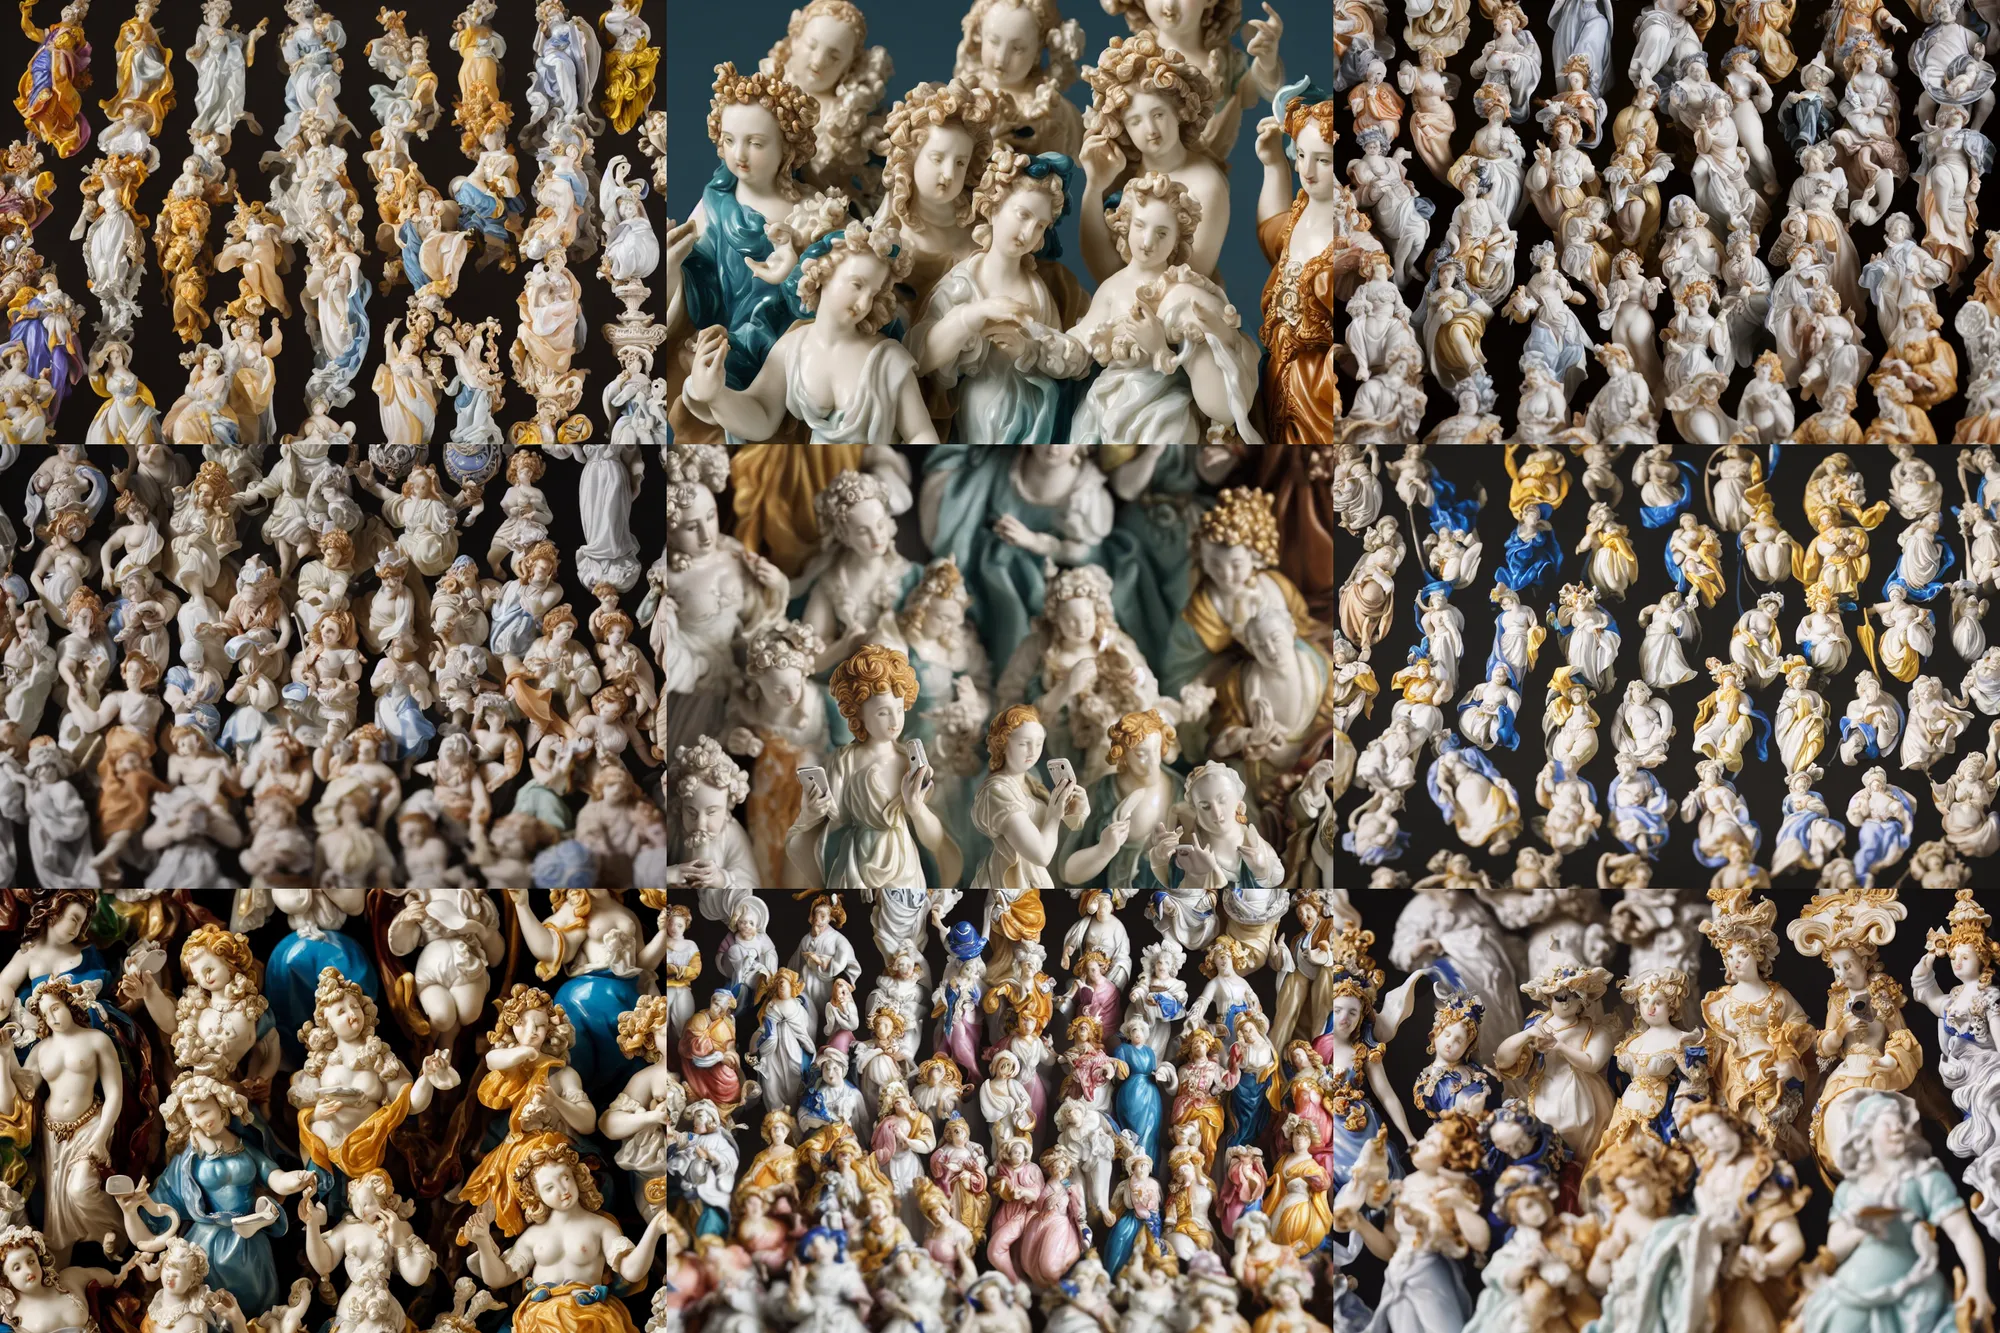 Prompt: A close up photo of vivid porcelain composition of diverse baroque figurines staring down at their iphones, Tamron SP 90mm F/2.8 Di VC USD Macro